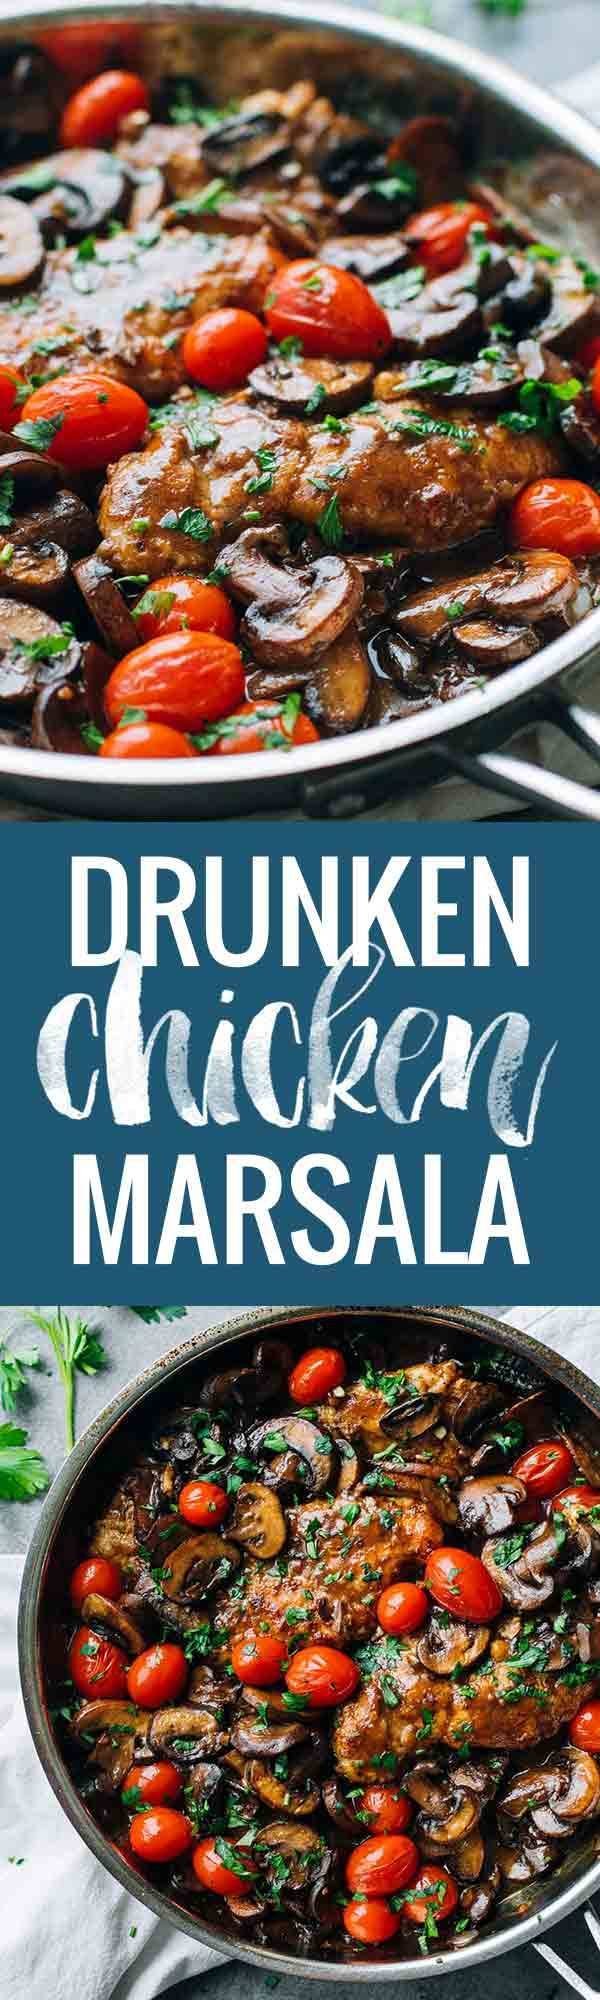 Drunken Chicken Marsala with Tomatoes - simple, gorgeously vibrant, and full of rich flavor.